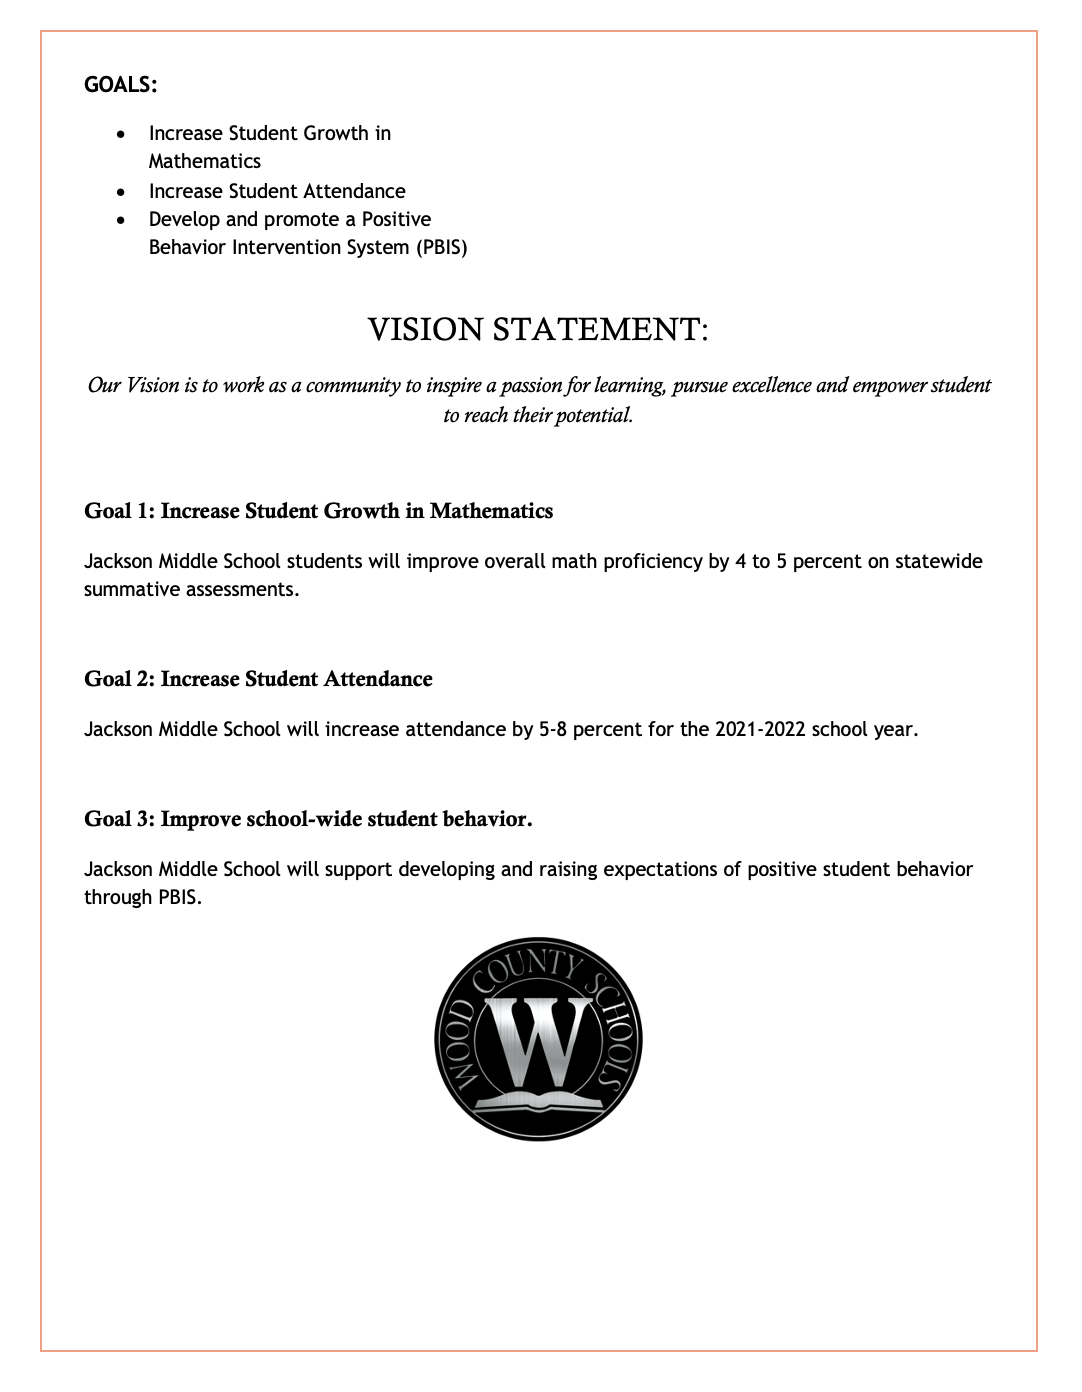 Goals and Vision Statement